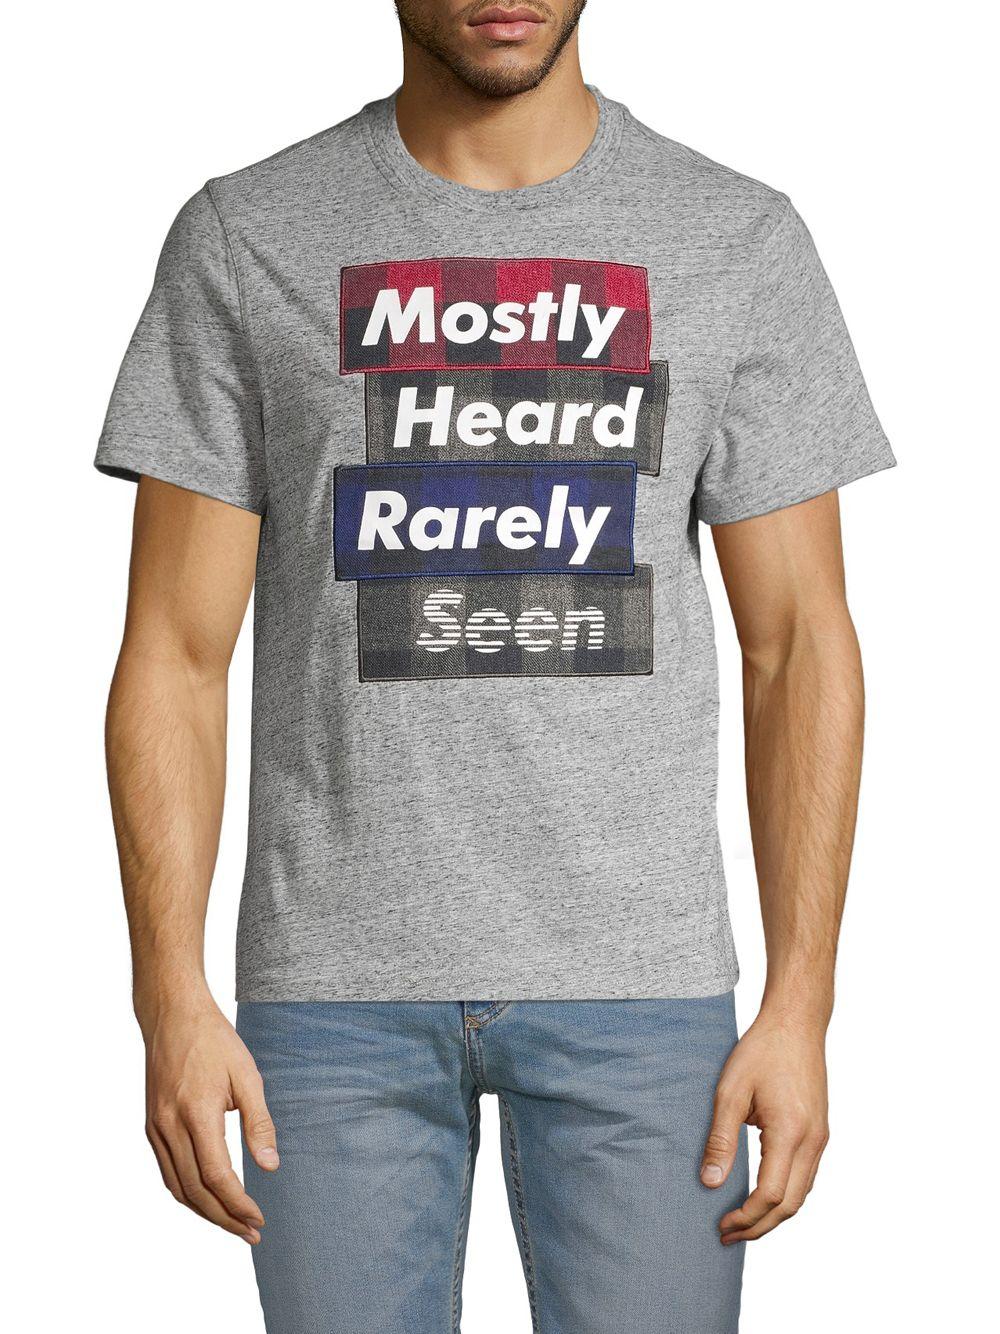 Mostly Heard Rarely Seen Multi-plaid Patchwork Tee in Gray for Men - Lyst